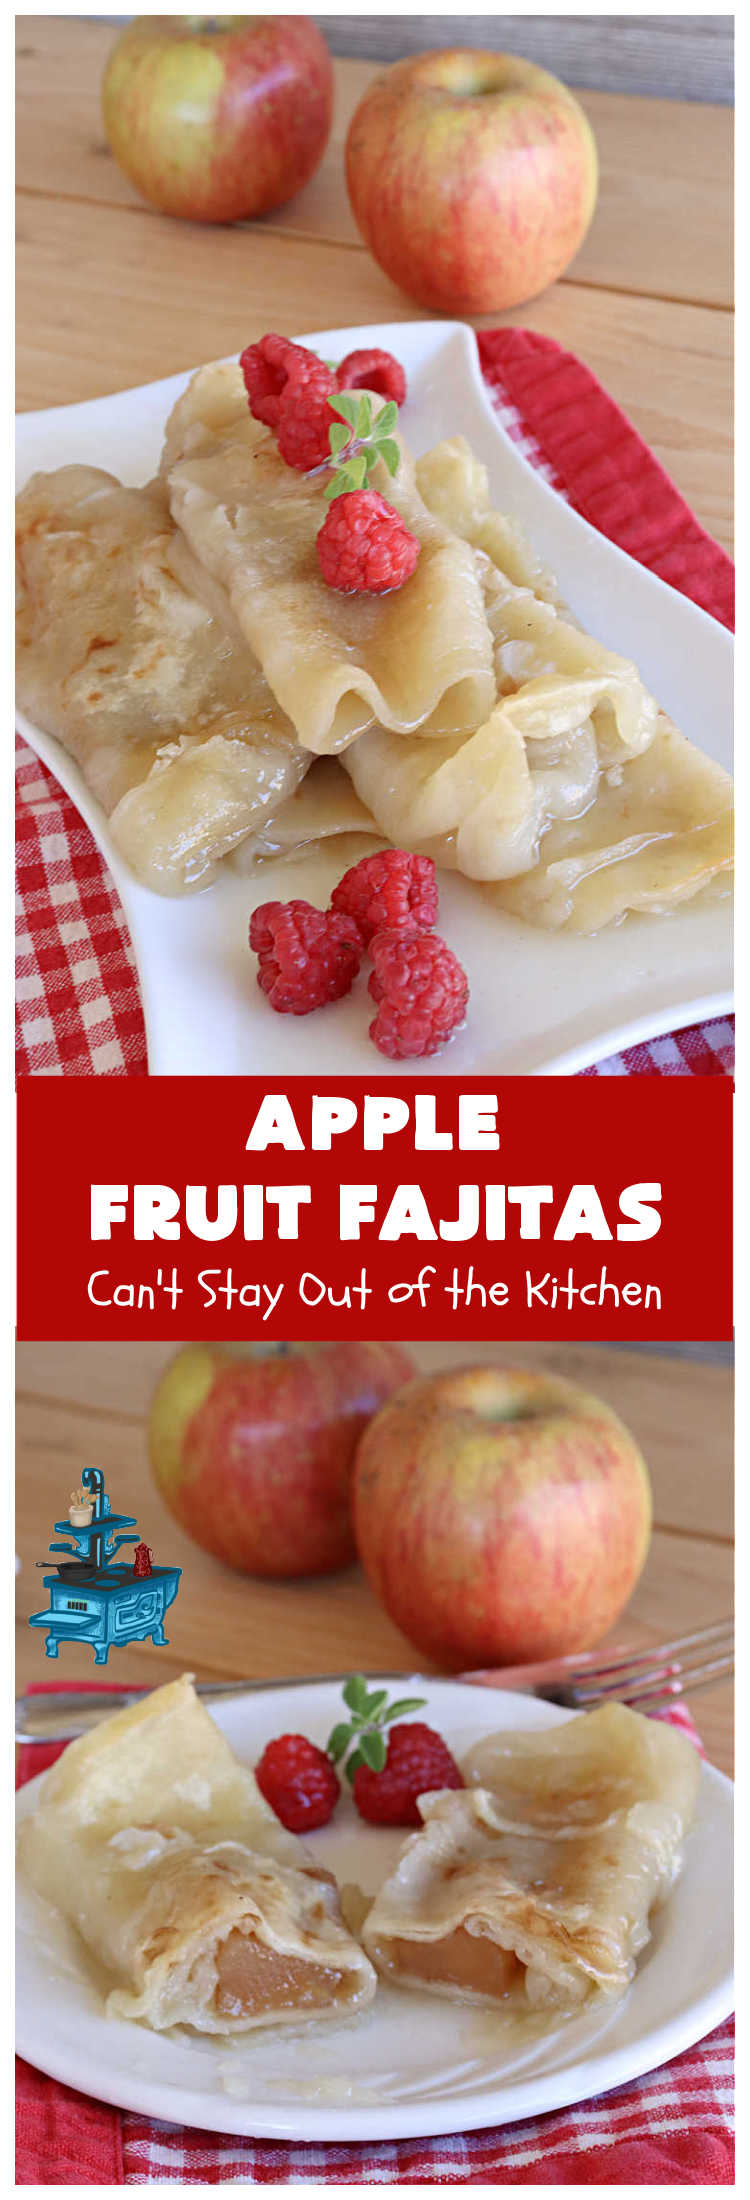 Apple Fruit Fajitas | Can't Stay Out of the Kitchen | these lovely #fruit-flavored #fajitas include #ApplePieFilling & a syrup is poured over top before baking. So easy to whip up for a quick #dessert. Also good for #breakfast! These use #CaramelApple pie filling making them even better! #apples #CaramelApples #AppleFruitFajitas #AppleDessert